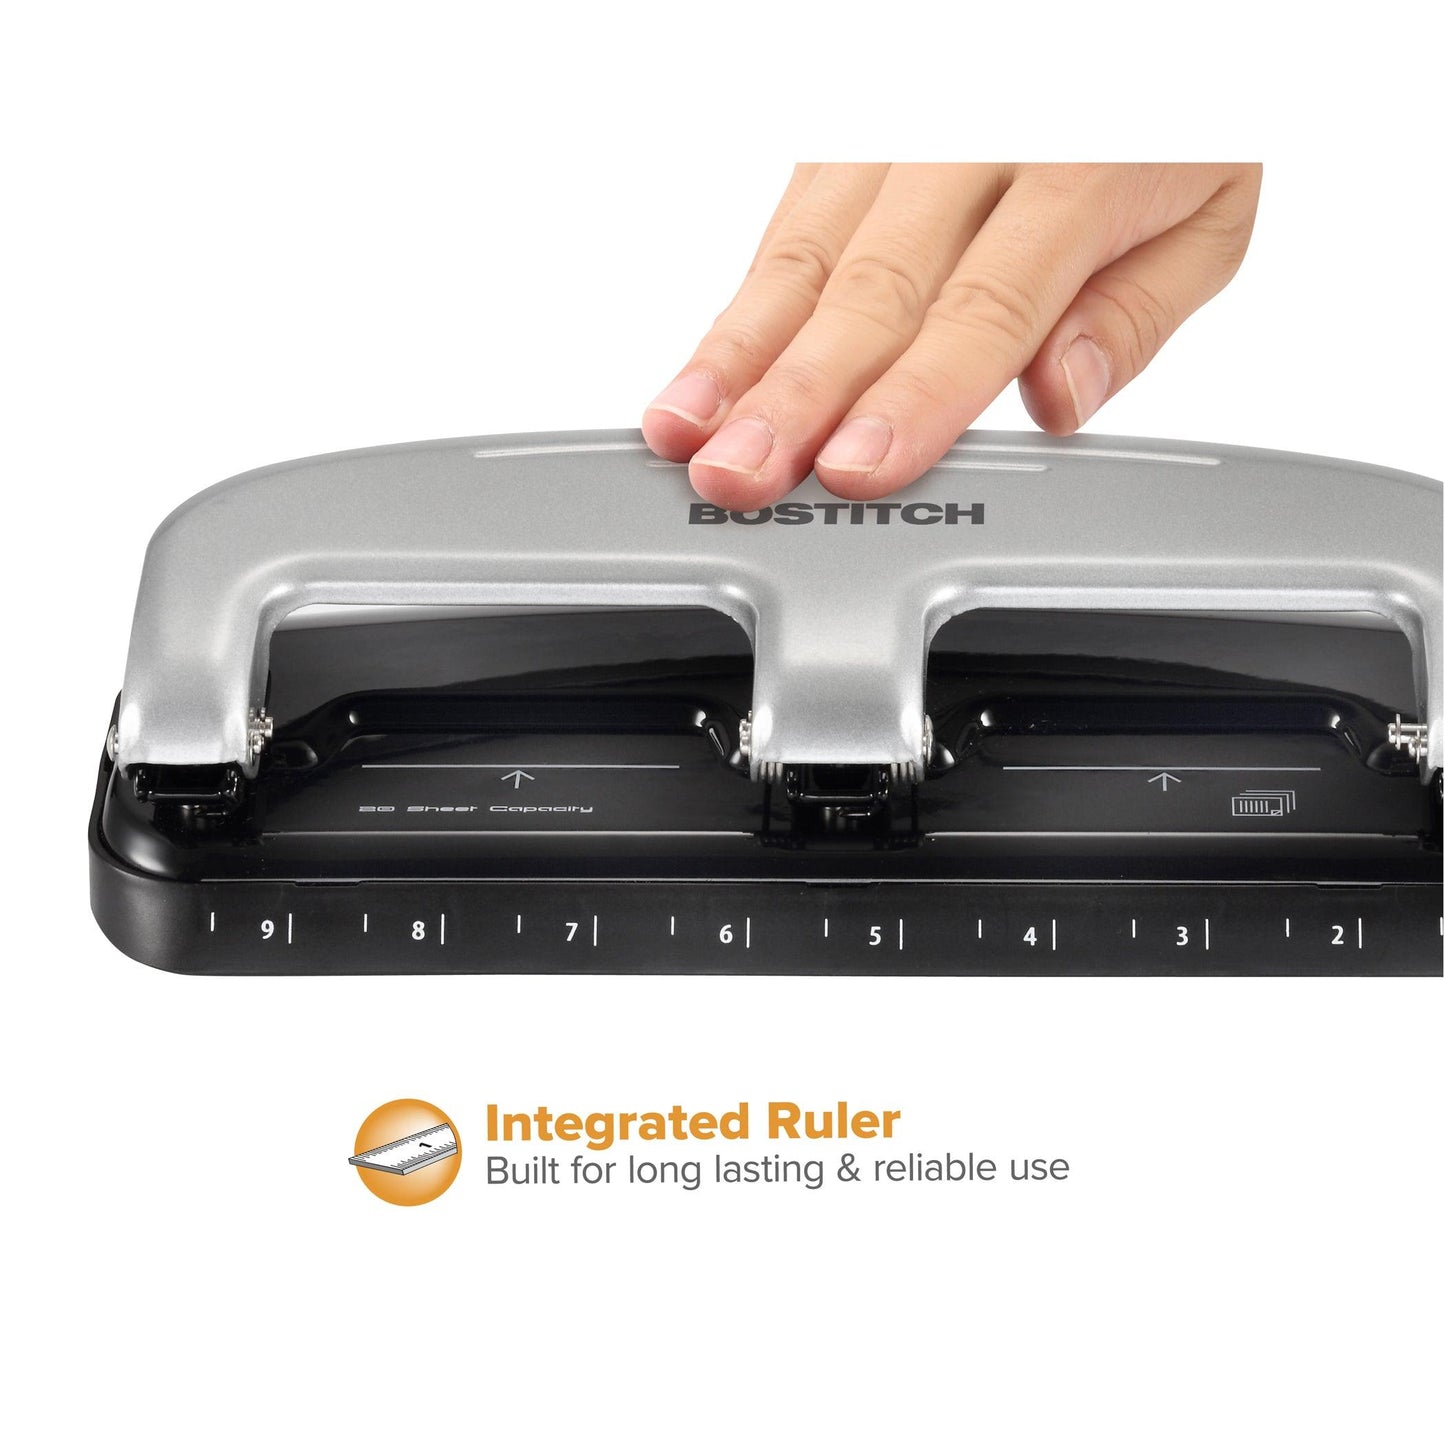 EZ Squeeze™ 3-Hole Punch, 20 Sheets, Silver/Black - Loomini